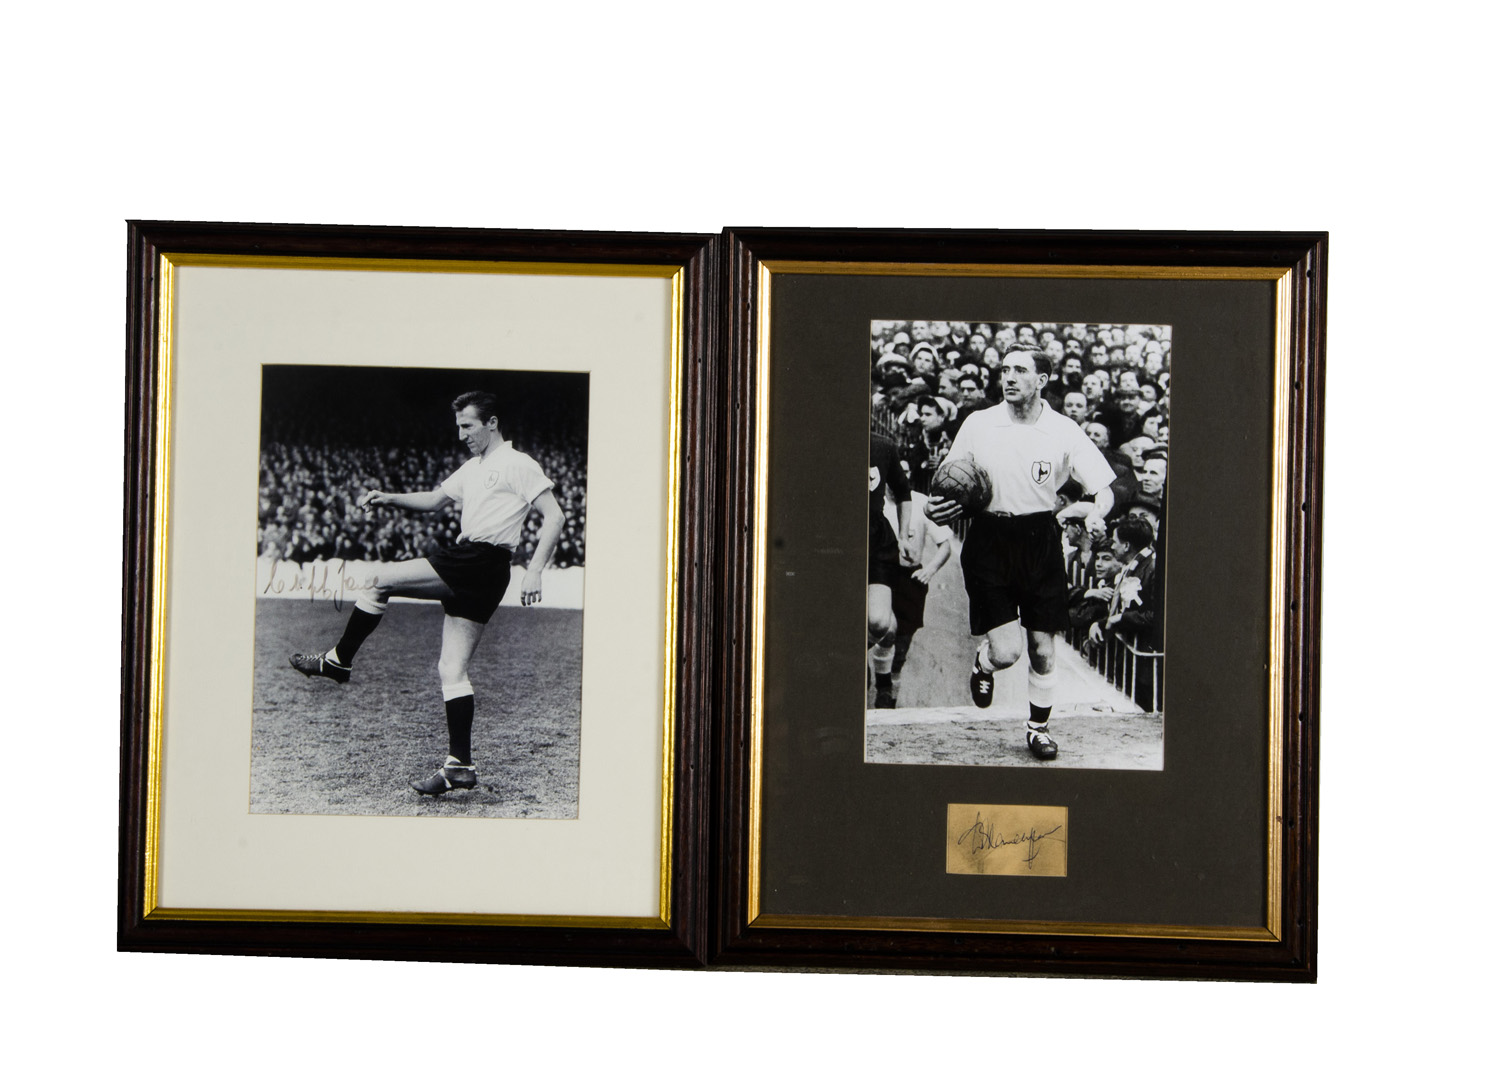 Tottenham Hotspurs, two black and white images of Cliff Jones and Danny Blanchflower, both with